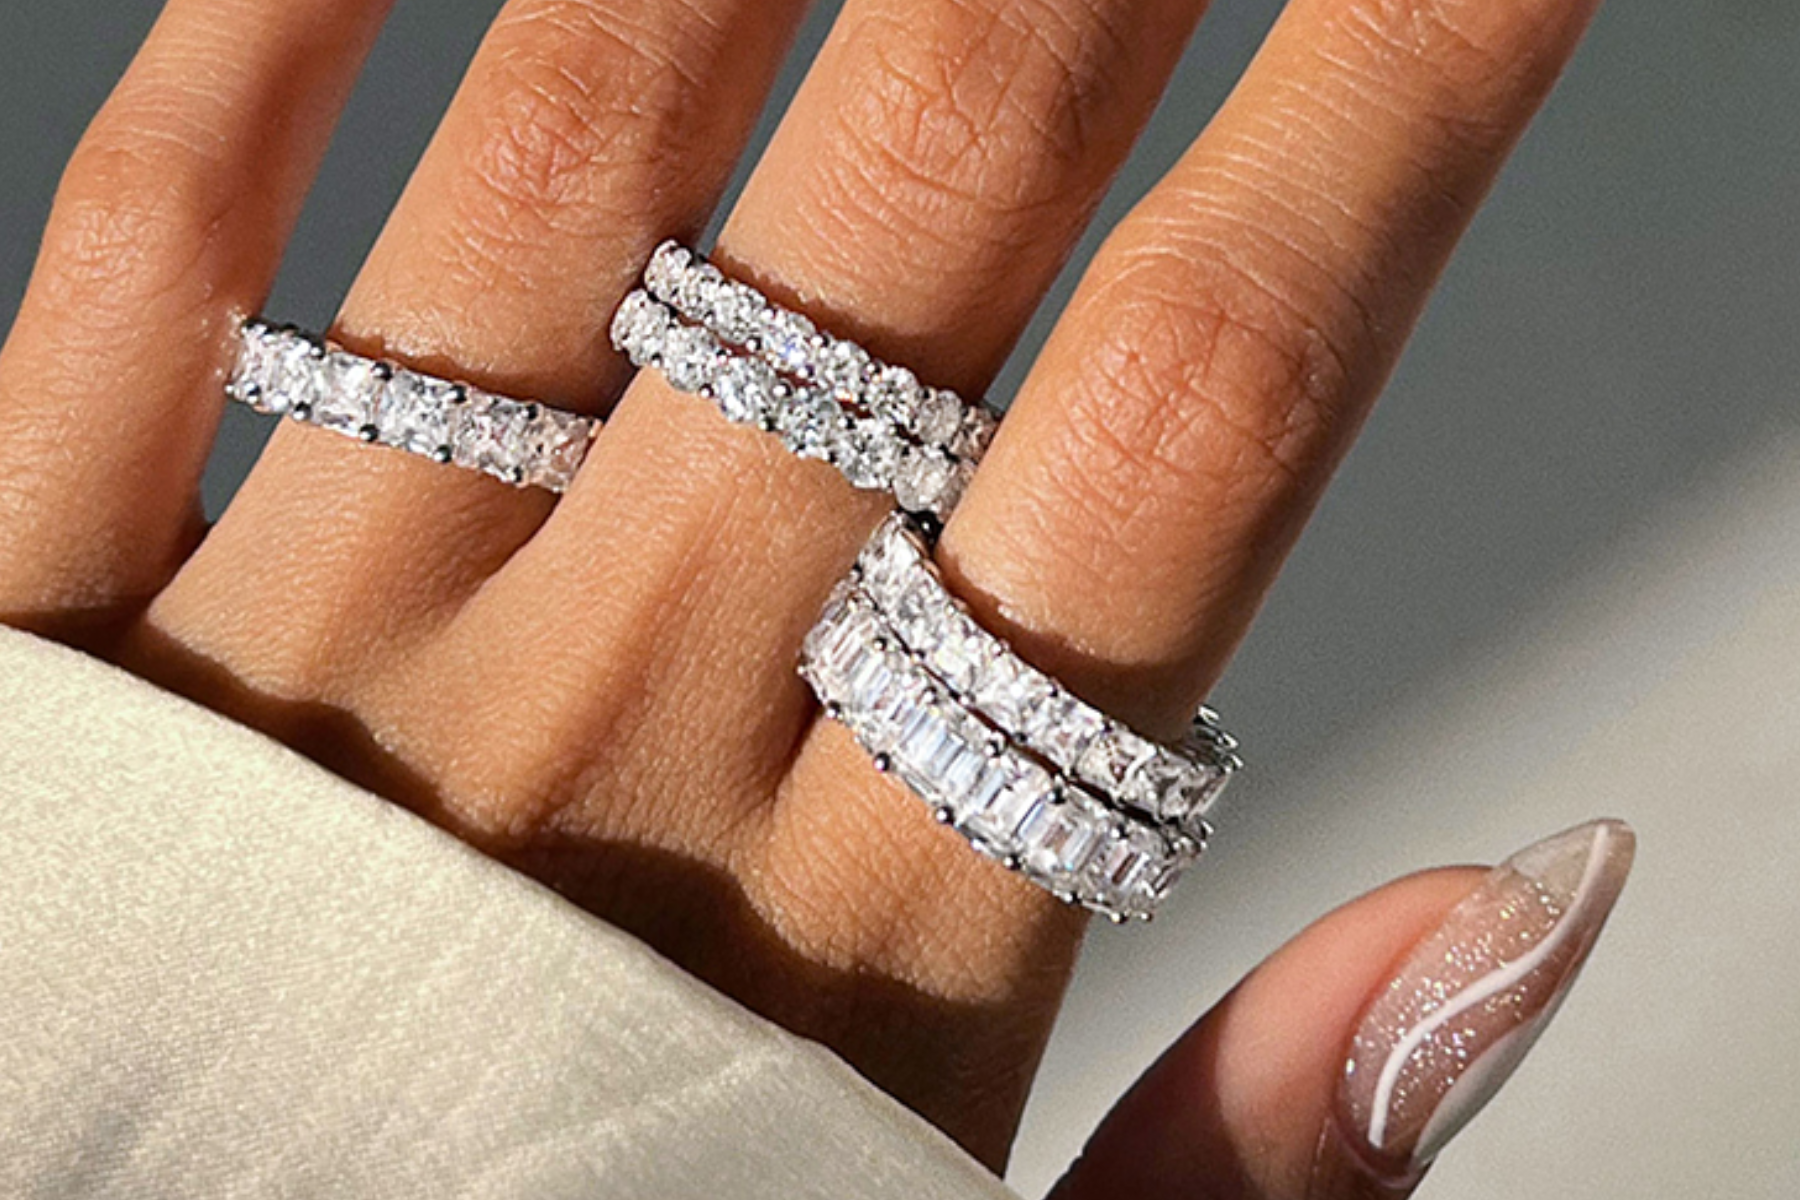 Five eternity bands adorn a woman's hand